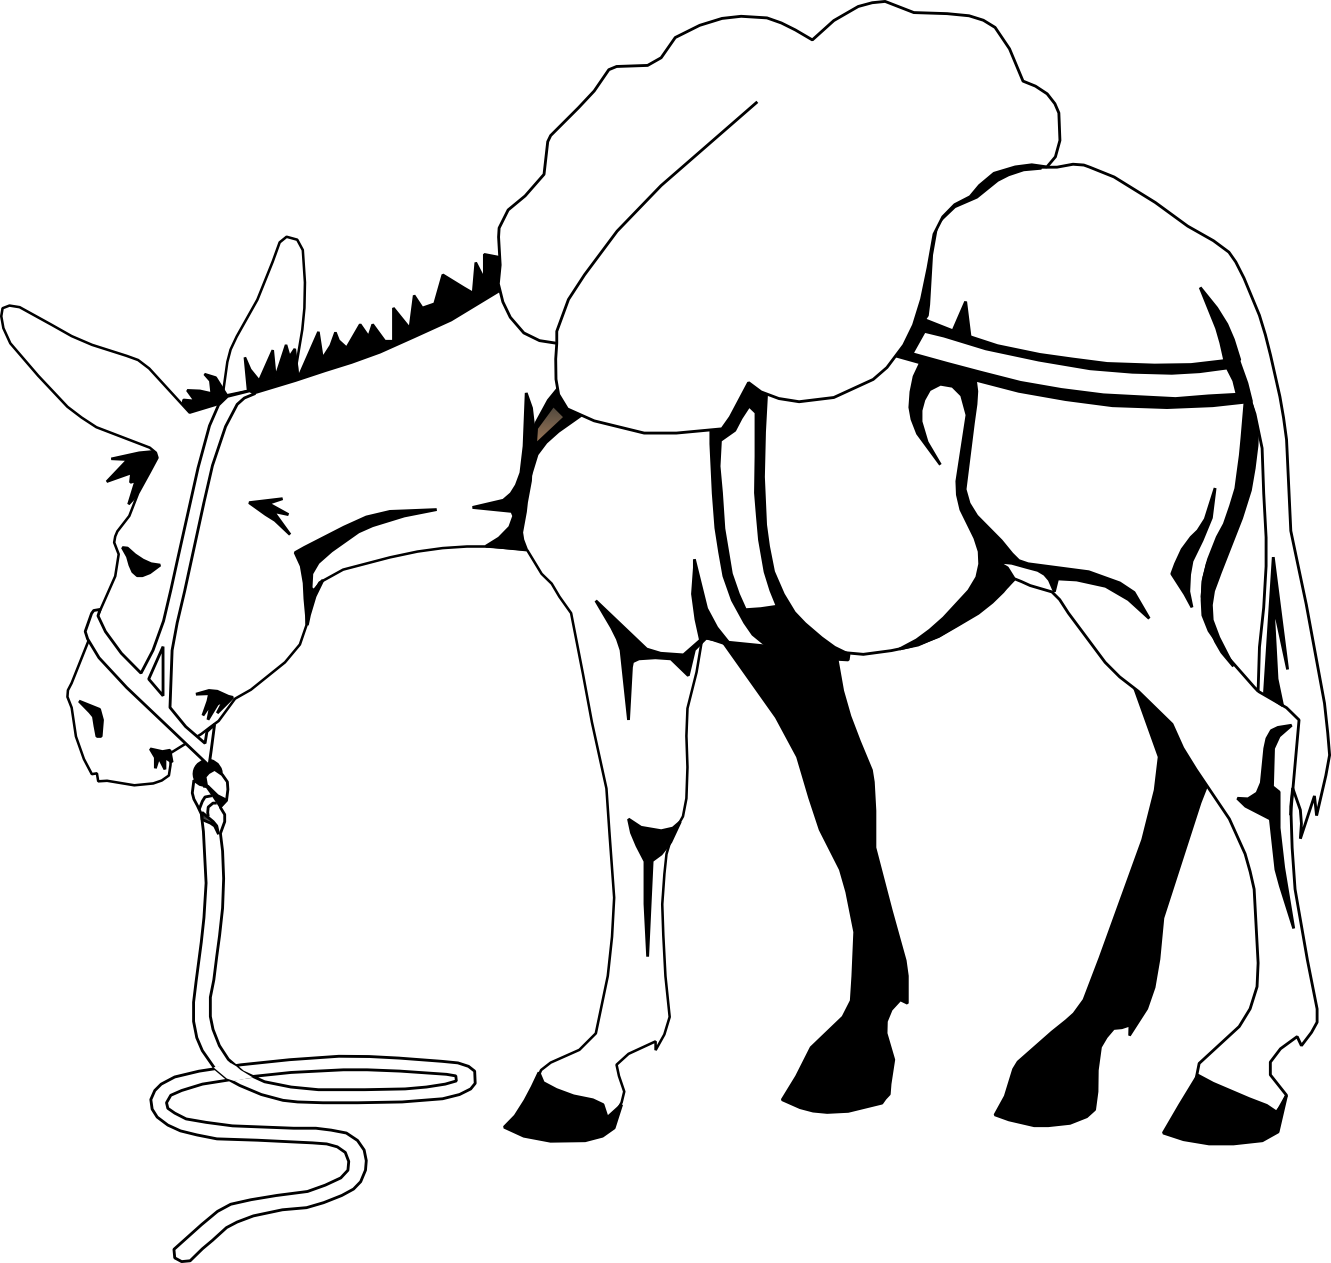 Donkey coloring page - Coloring Pages & Pictures - IMAGIXS